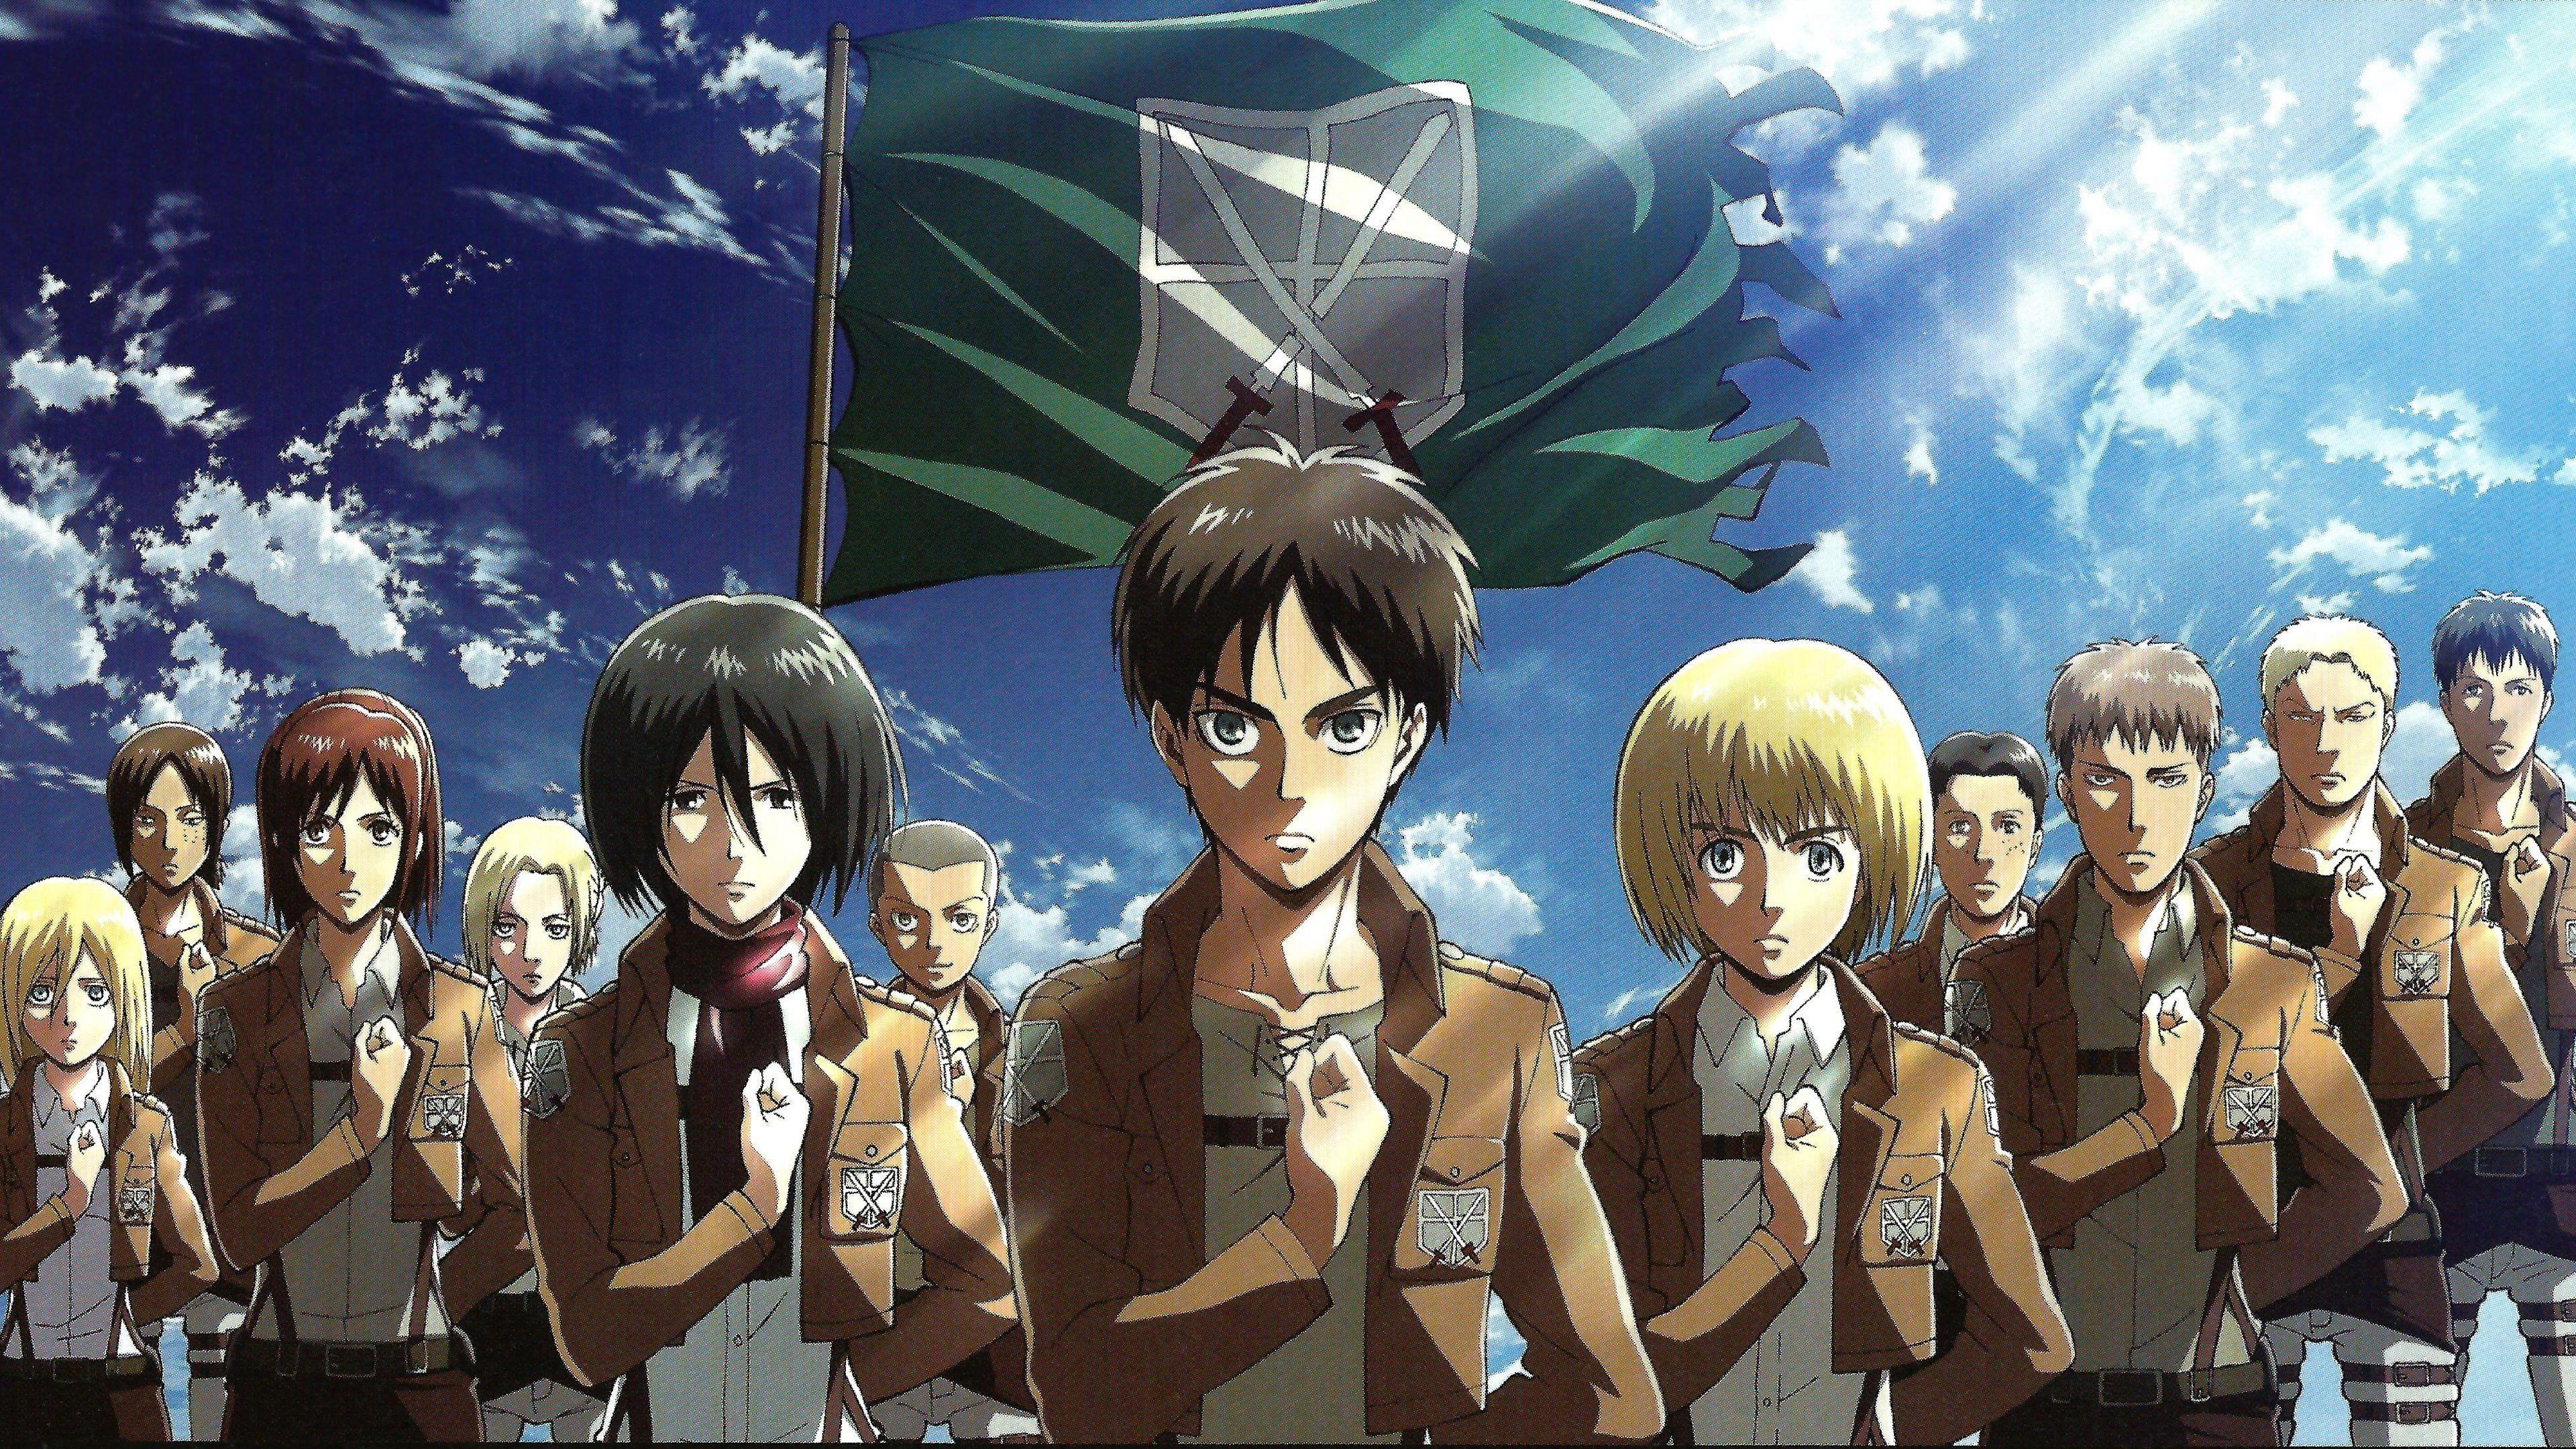 3840 x 2160 · jpeg - Attack On Titan Characters Wallpapers - Top Free Attack On Titan ...